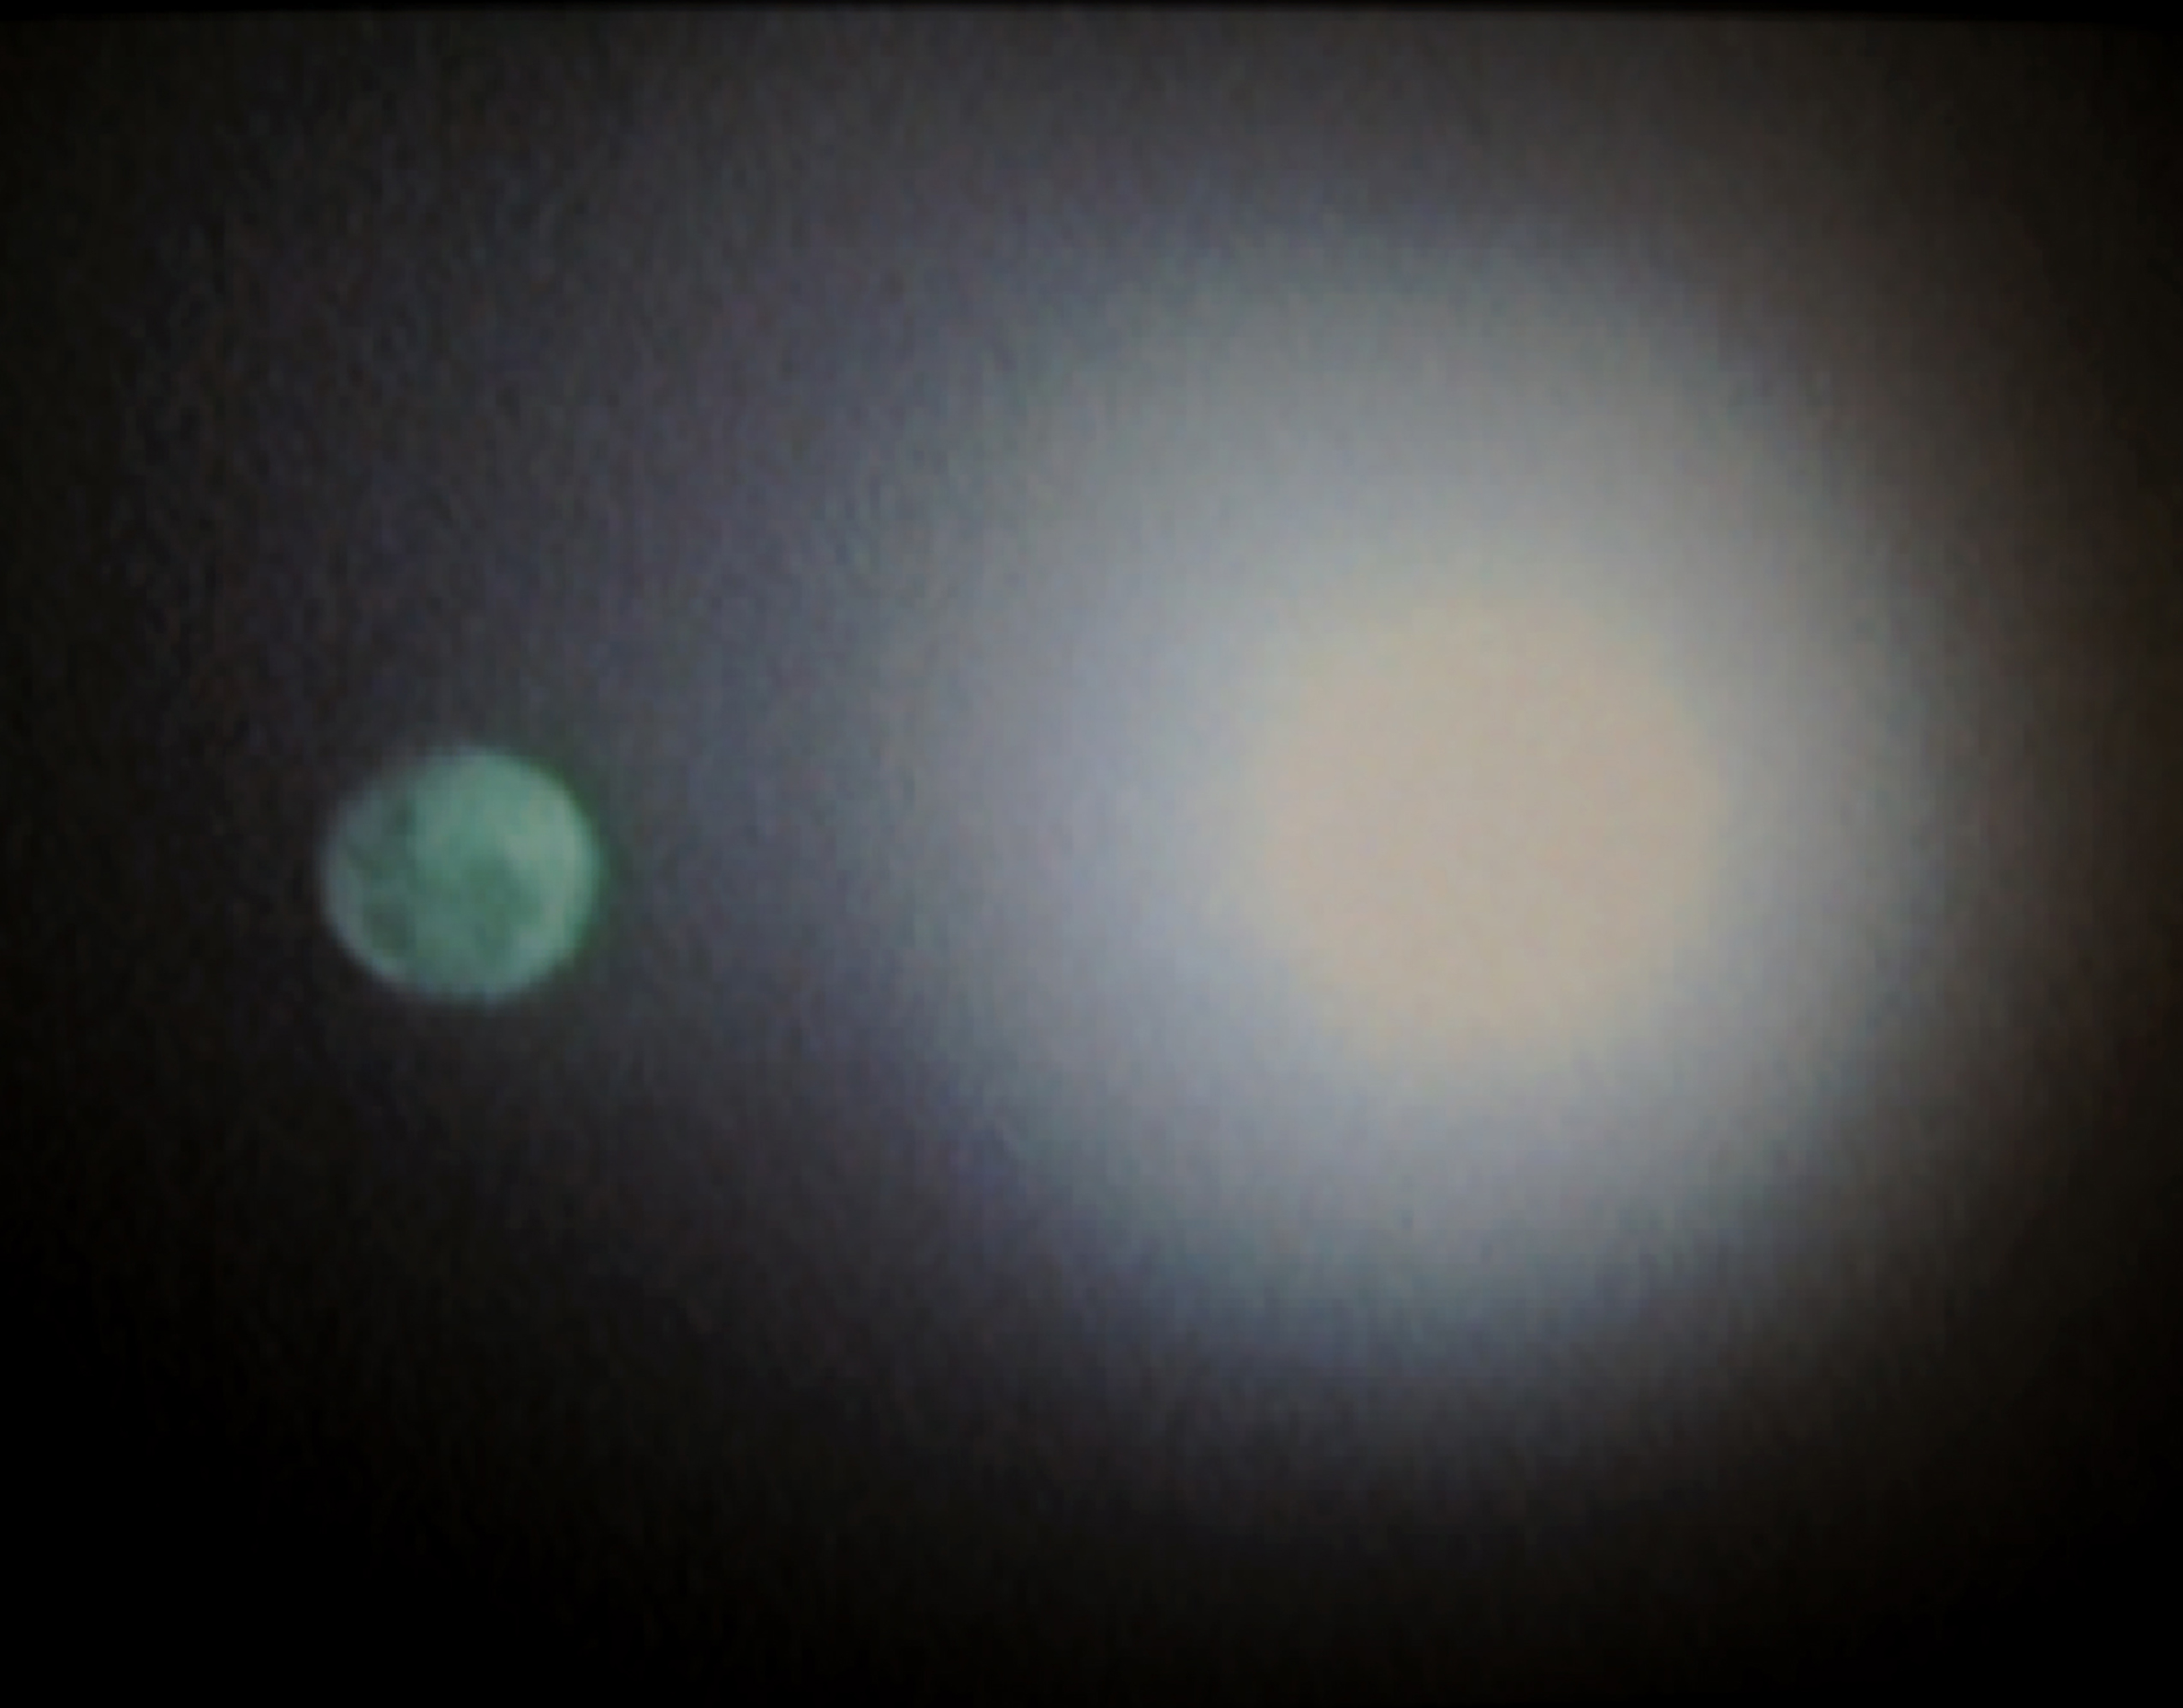 Barbara Ess, The Moon and Its Aura [Remote Series], 2011, Archival pigment print mounted on aluminum, 24h x 32w in.